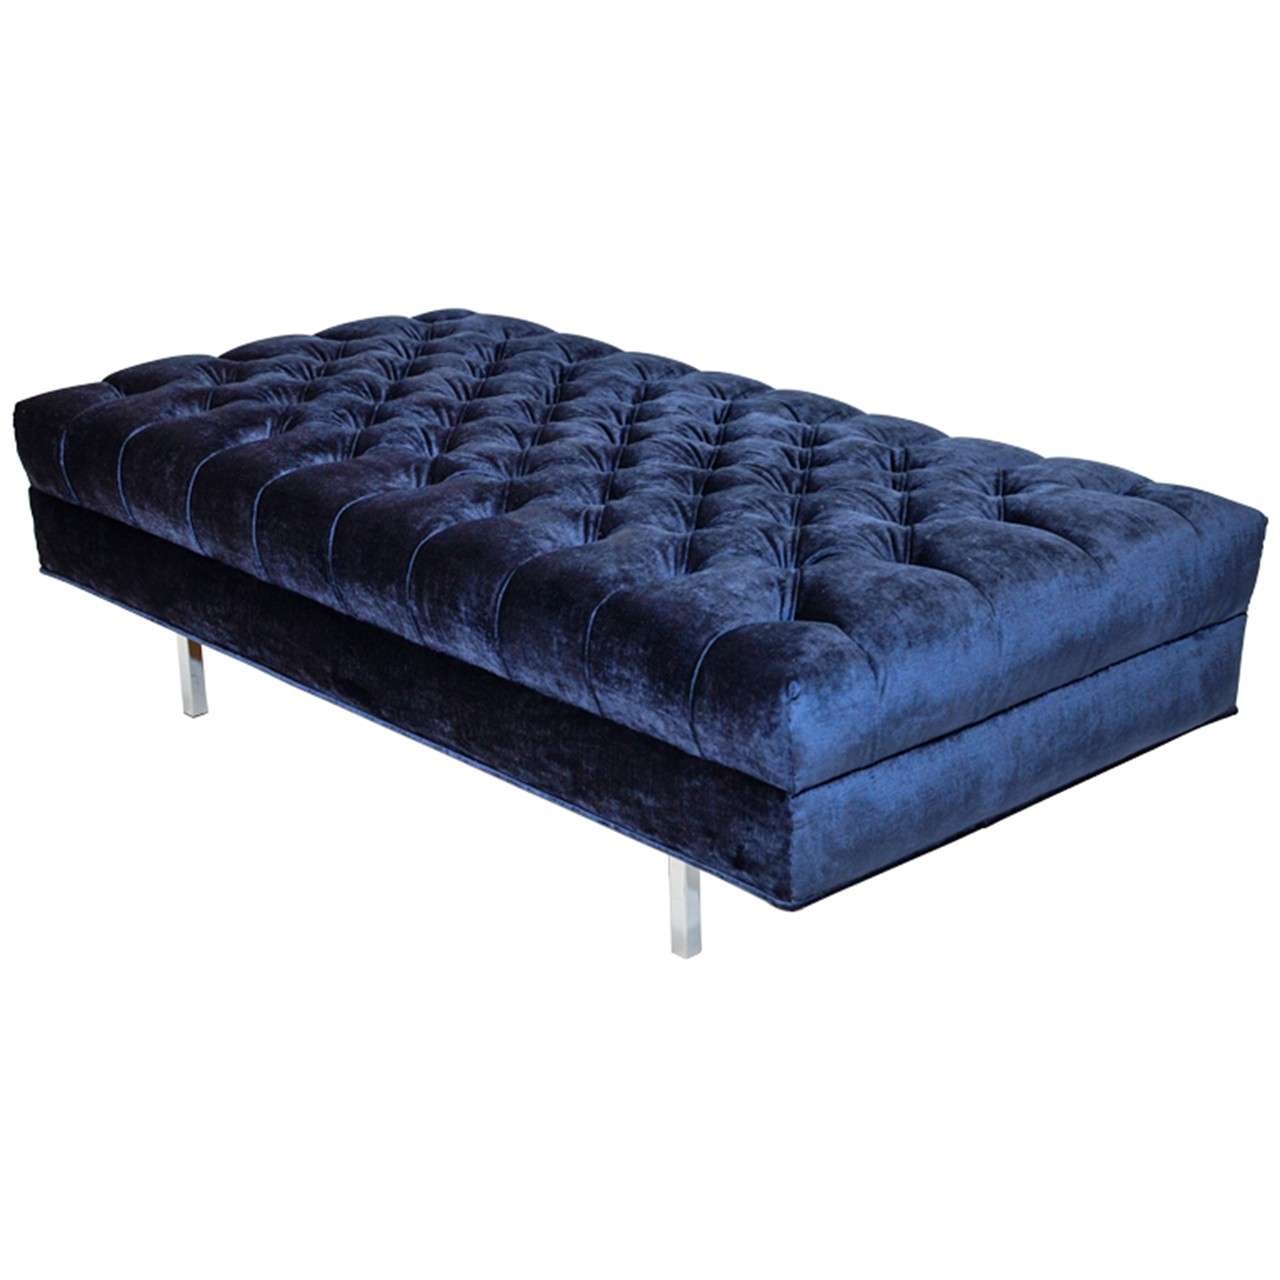 Floating Ludlow custom tufted bench or coffee table. It is a versatile piece; broad enough to support serving trays and can be used as a coffee table. This is available as a custom order with variable dimensions. It comes in your desired size and